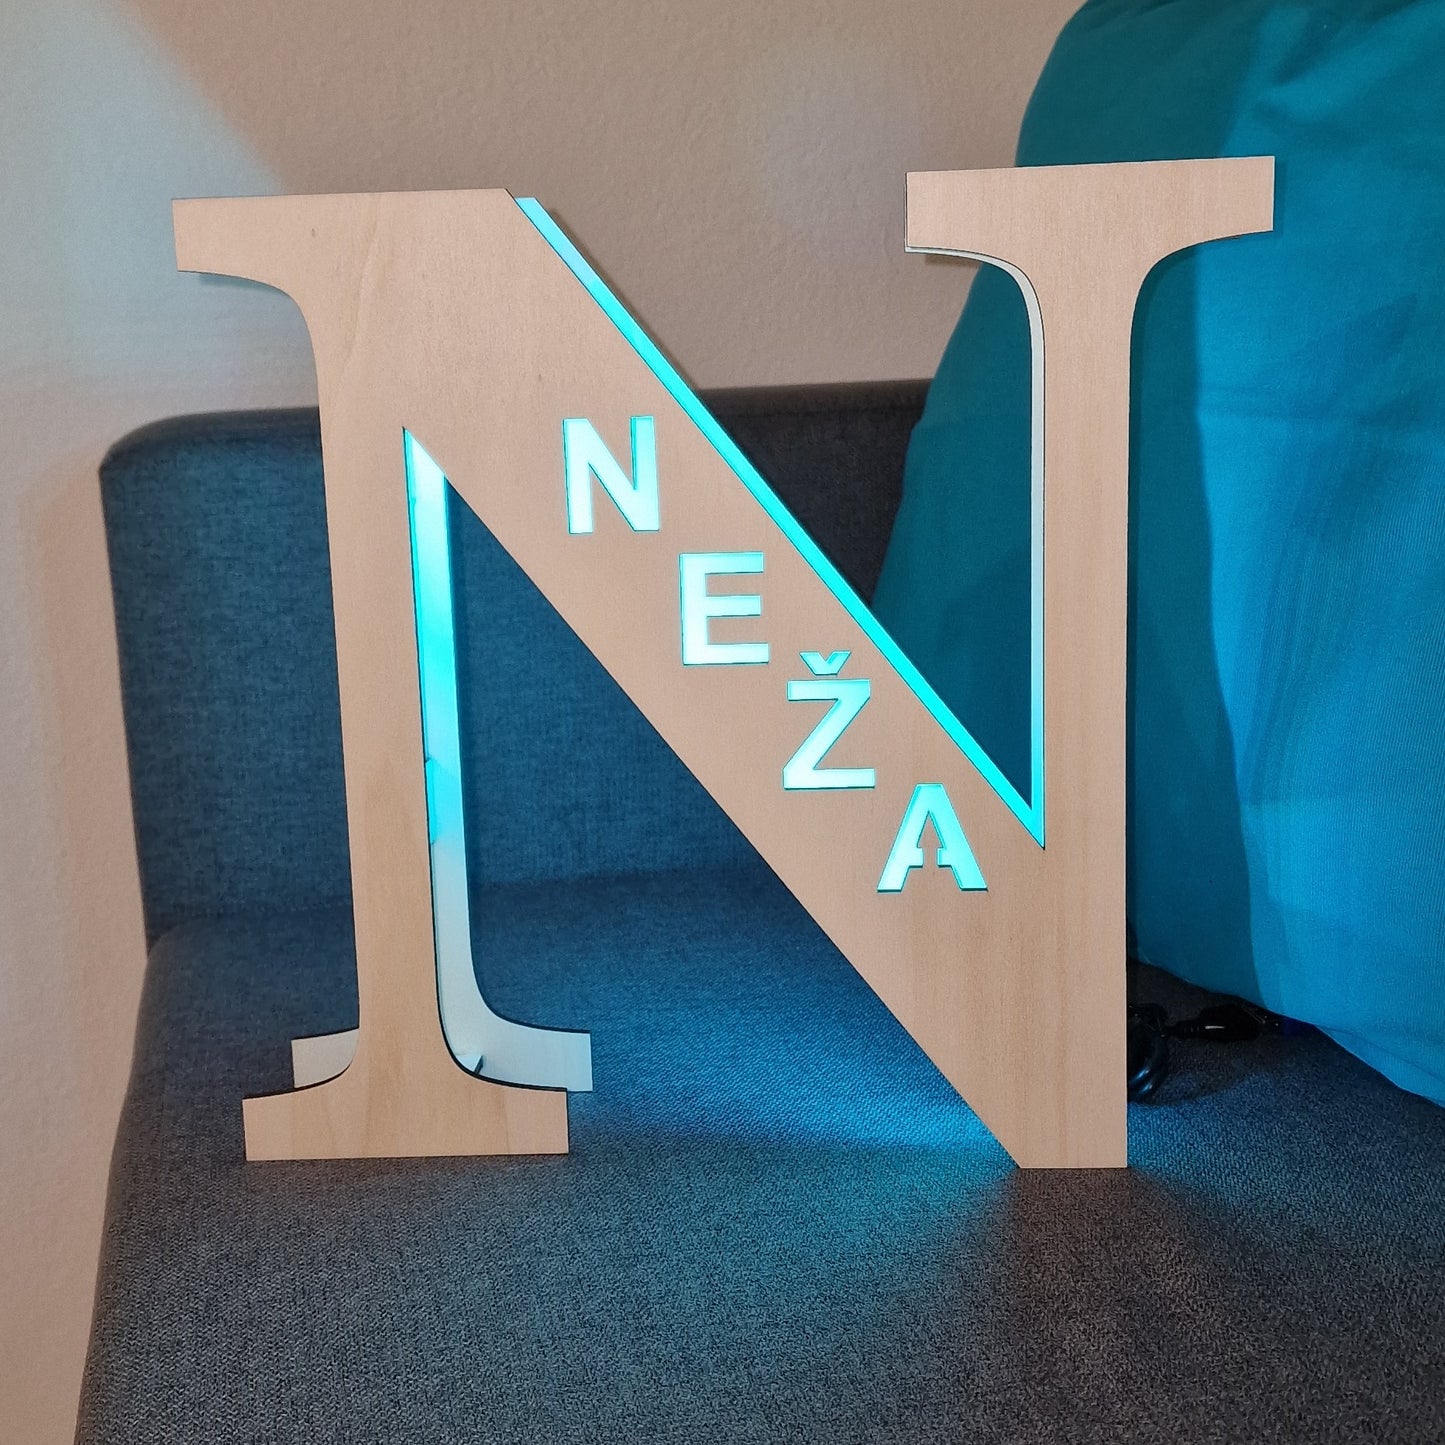 A wooden lamp with a name - Letter